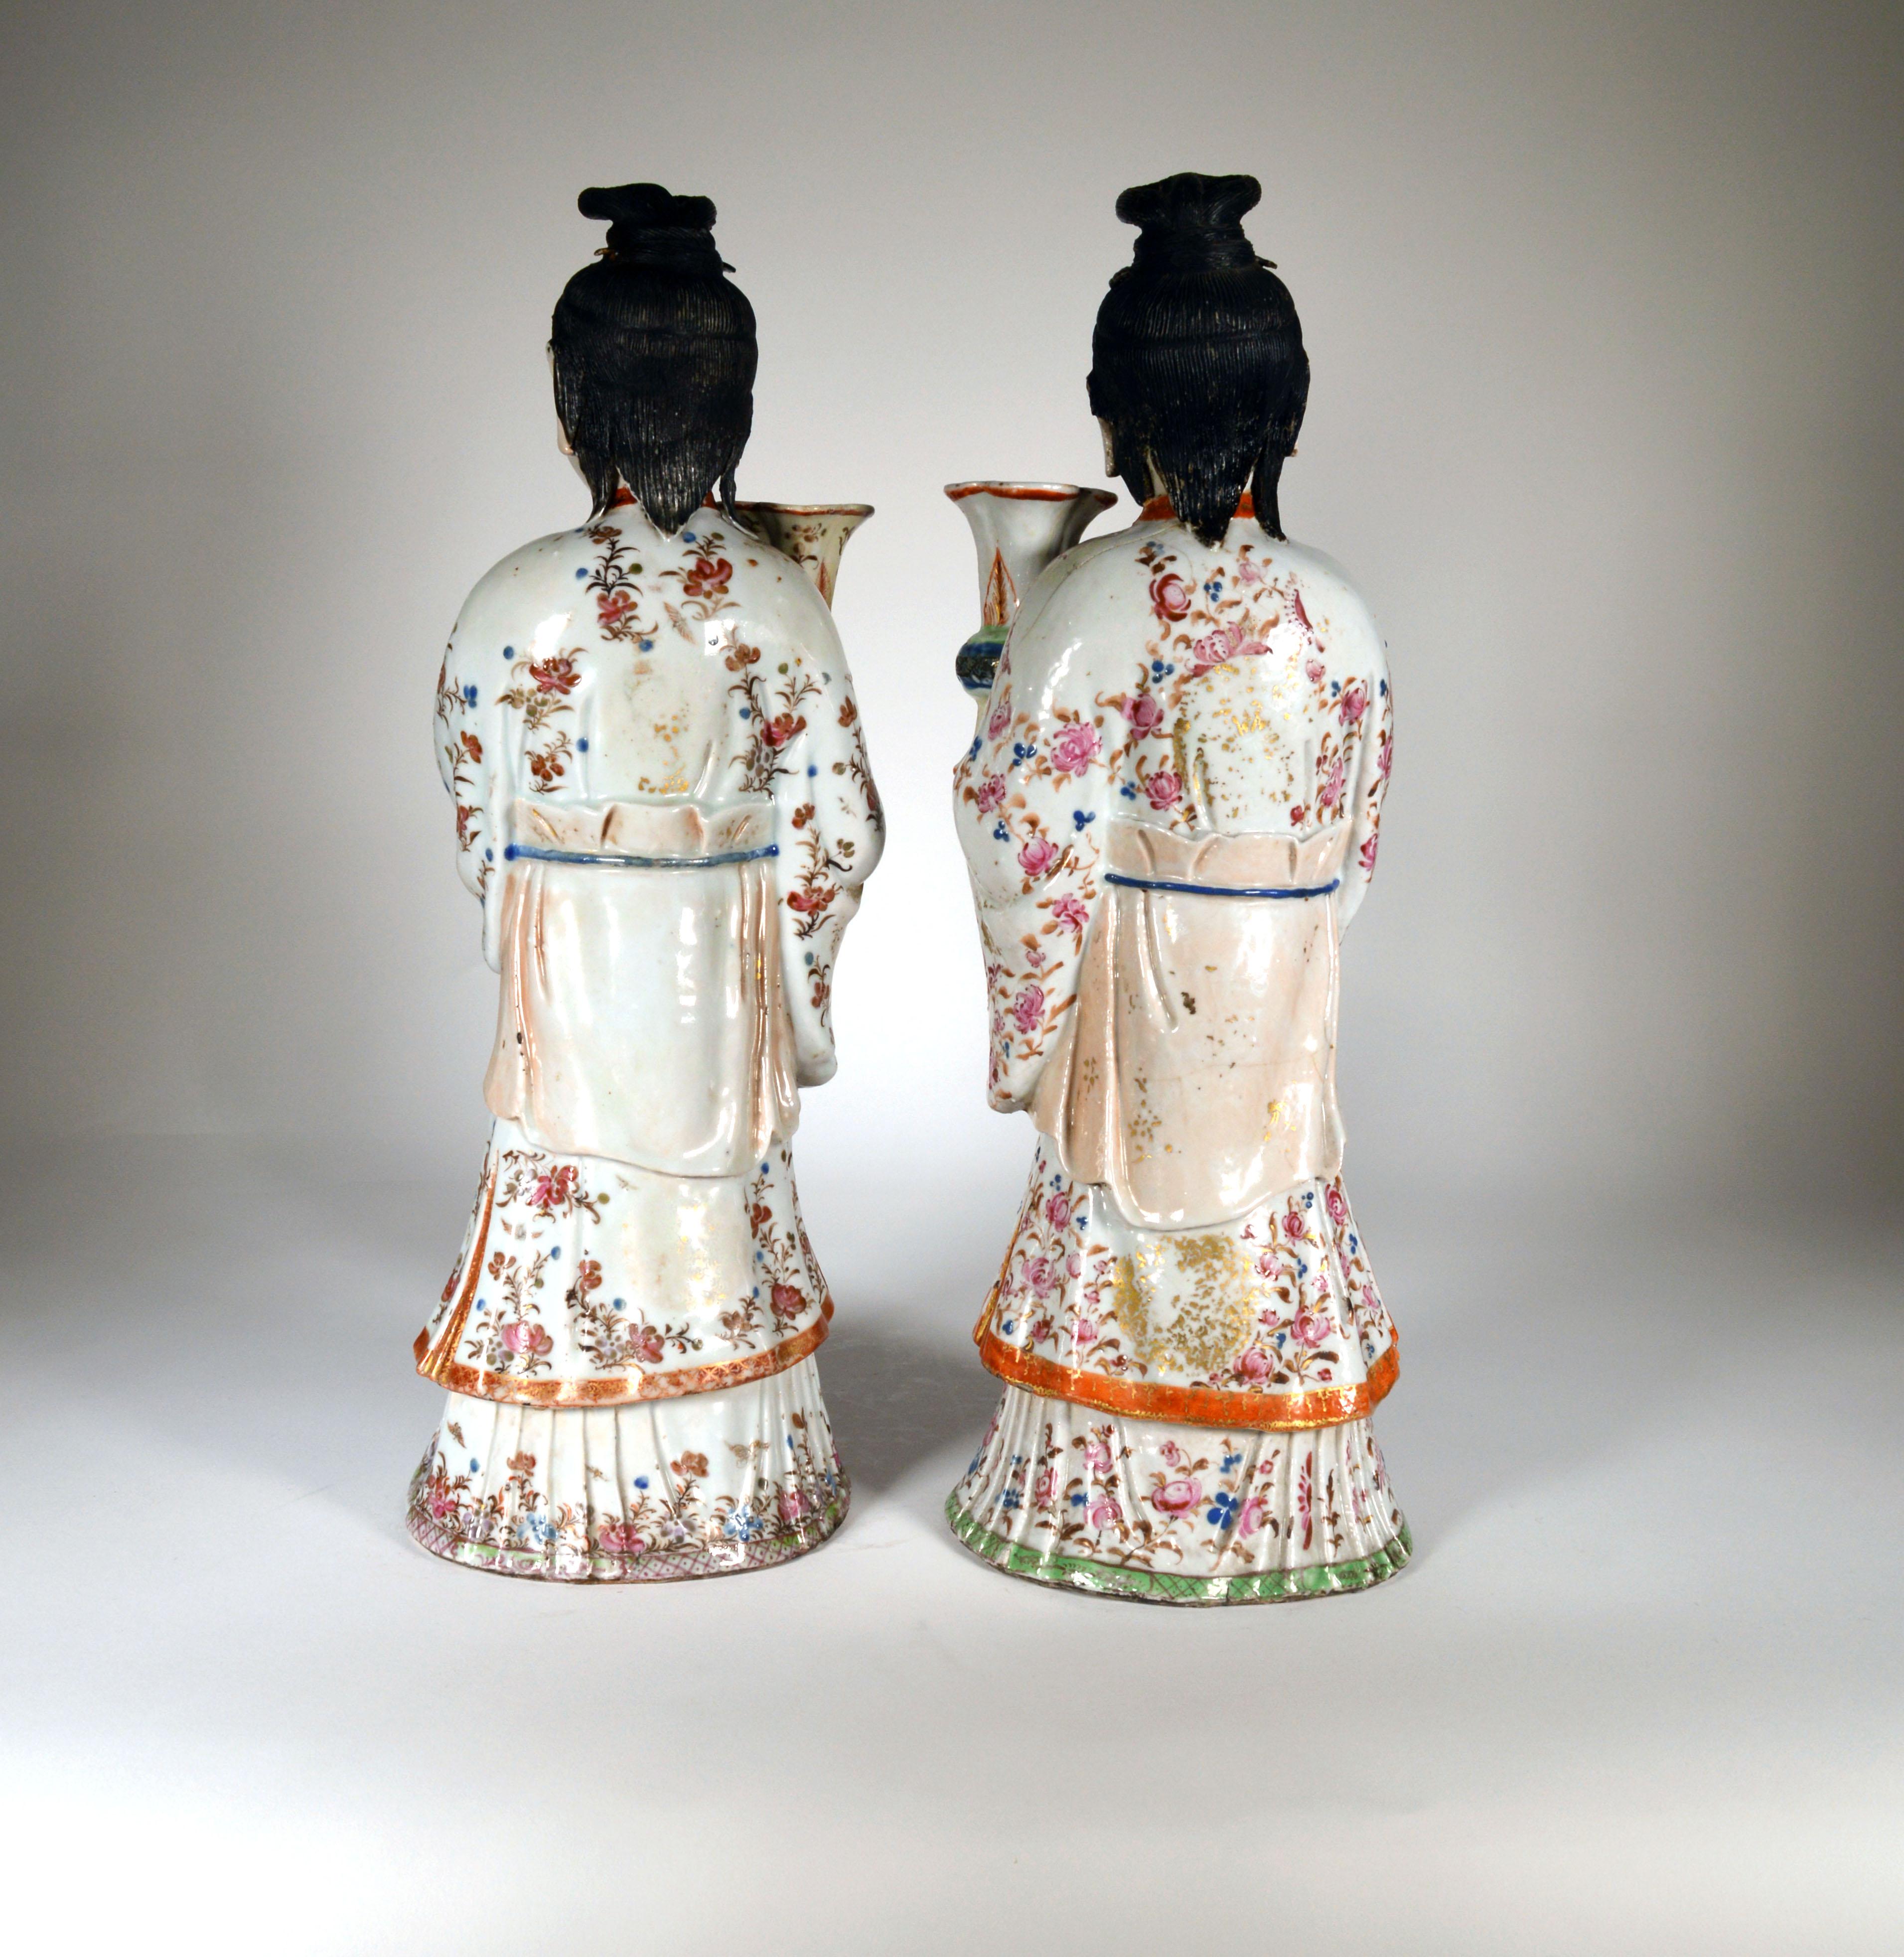 18th-century Chinese Export Porcelain Pair of Court Maiden Candlesticks For Sale 12